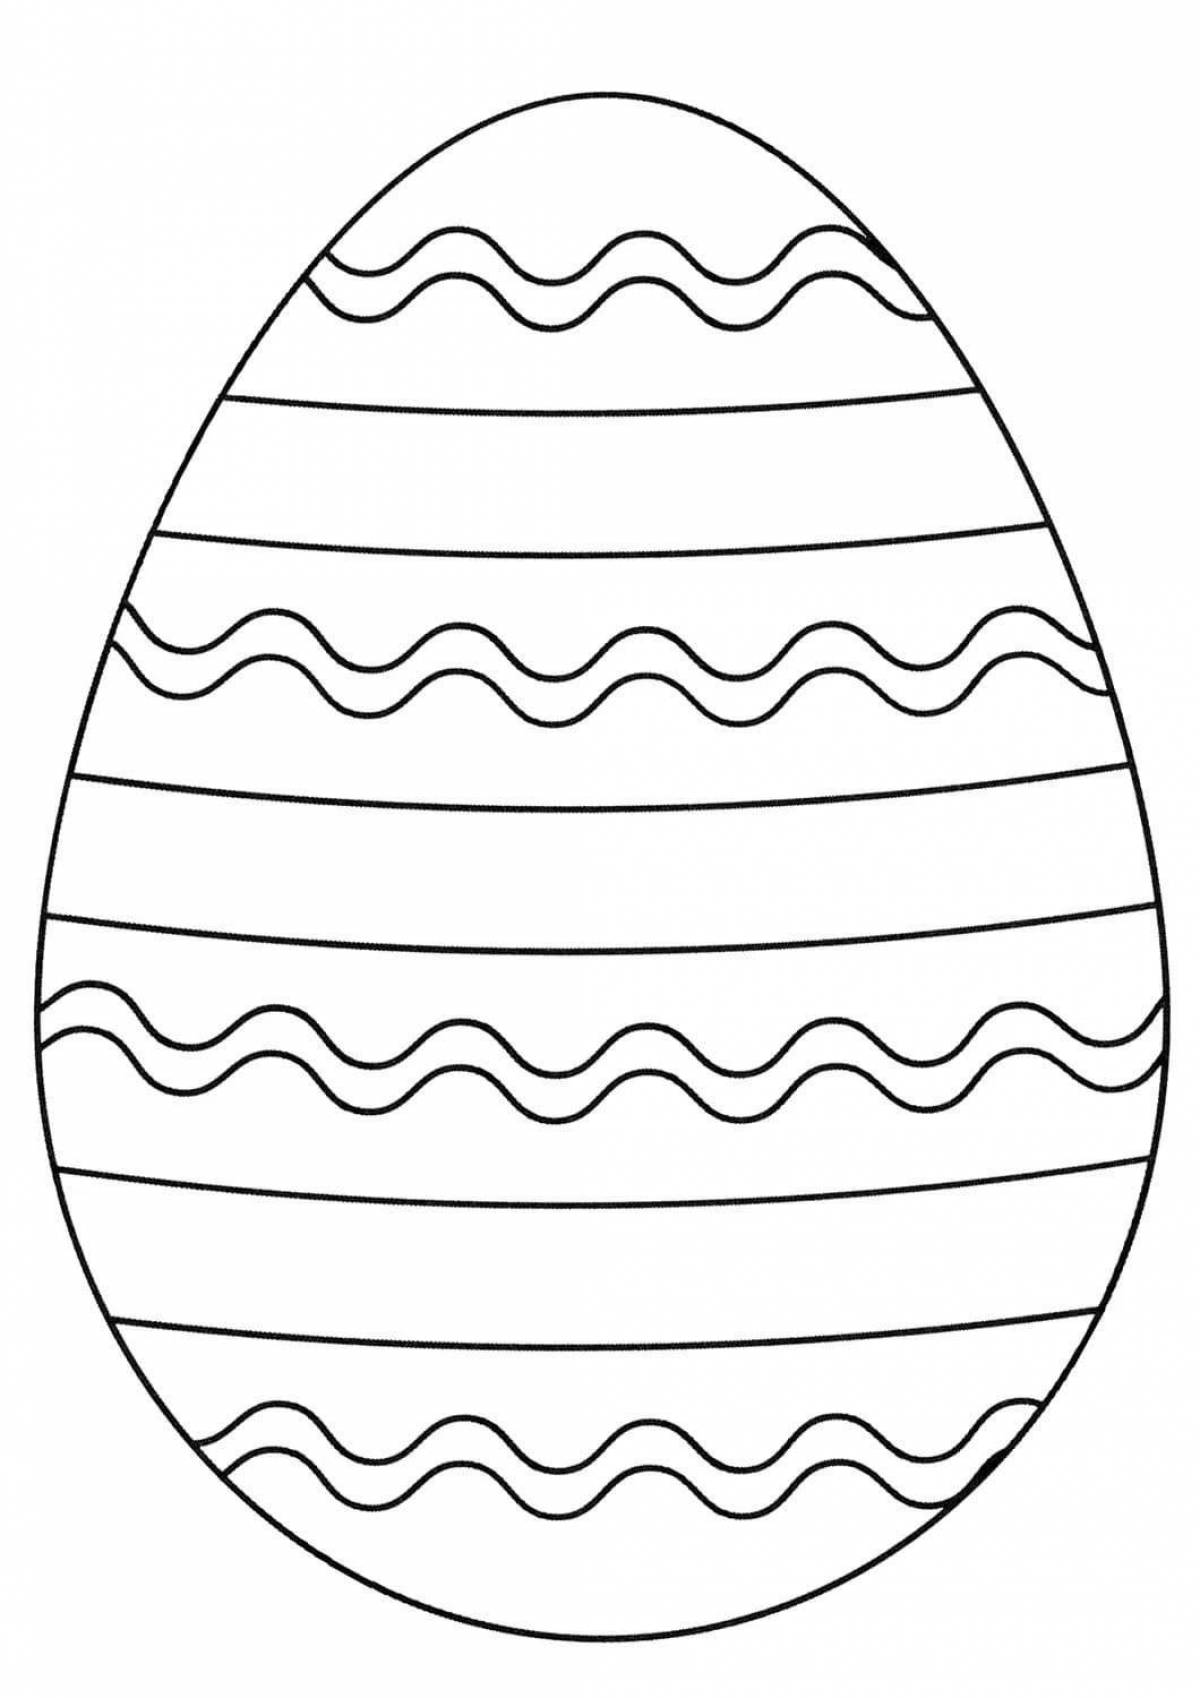 Adorable Easter Egg Coloring Page